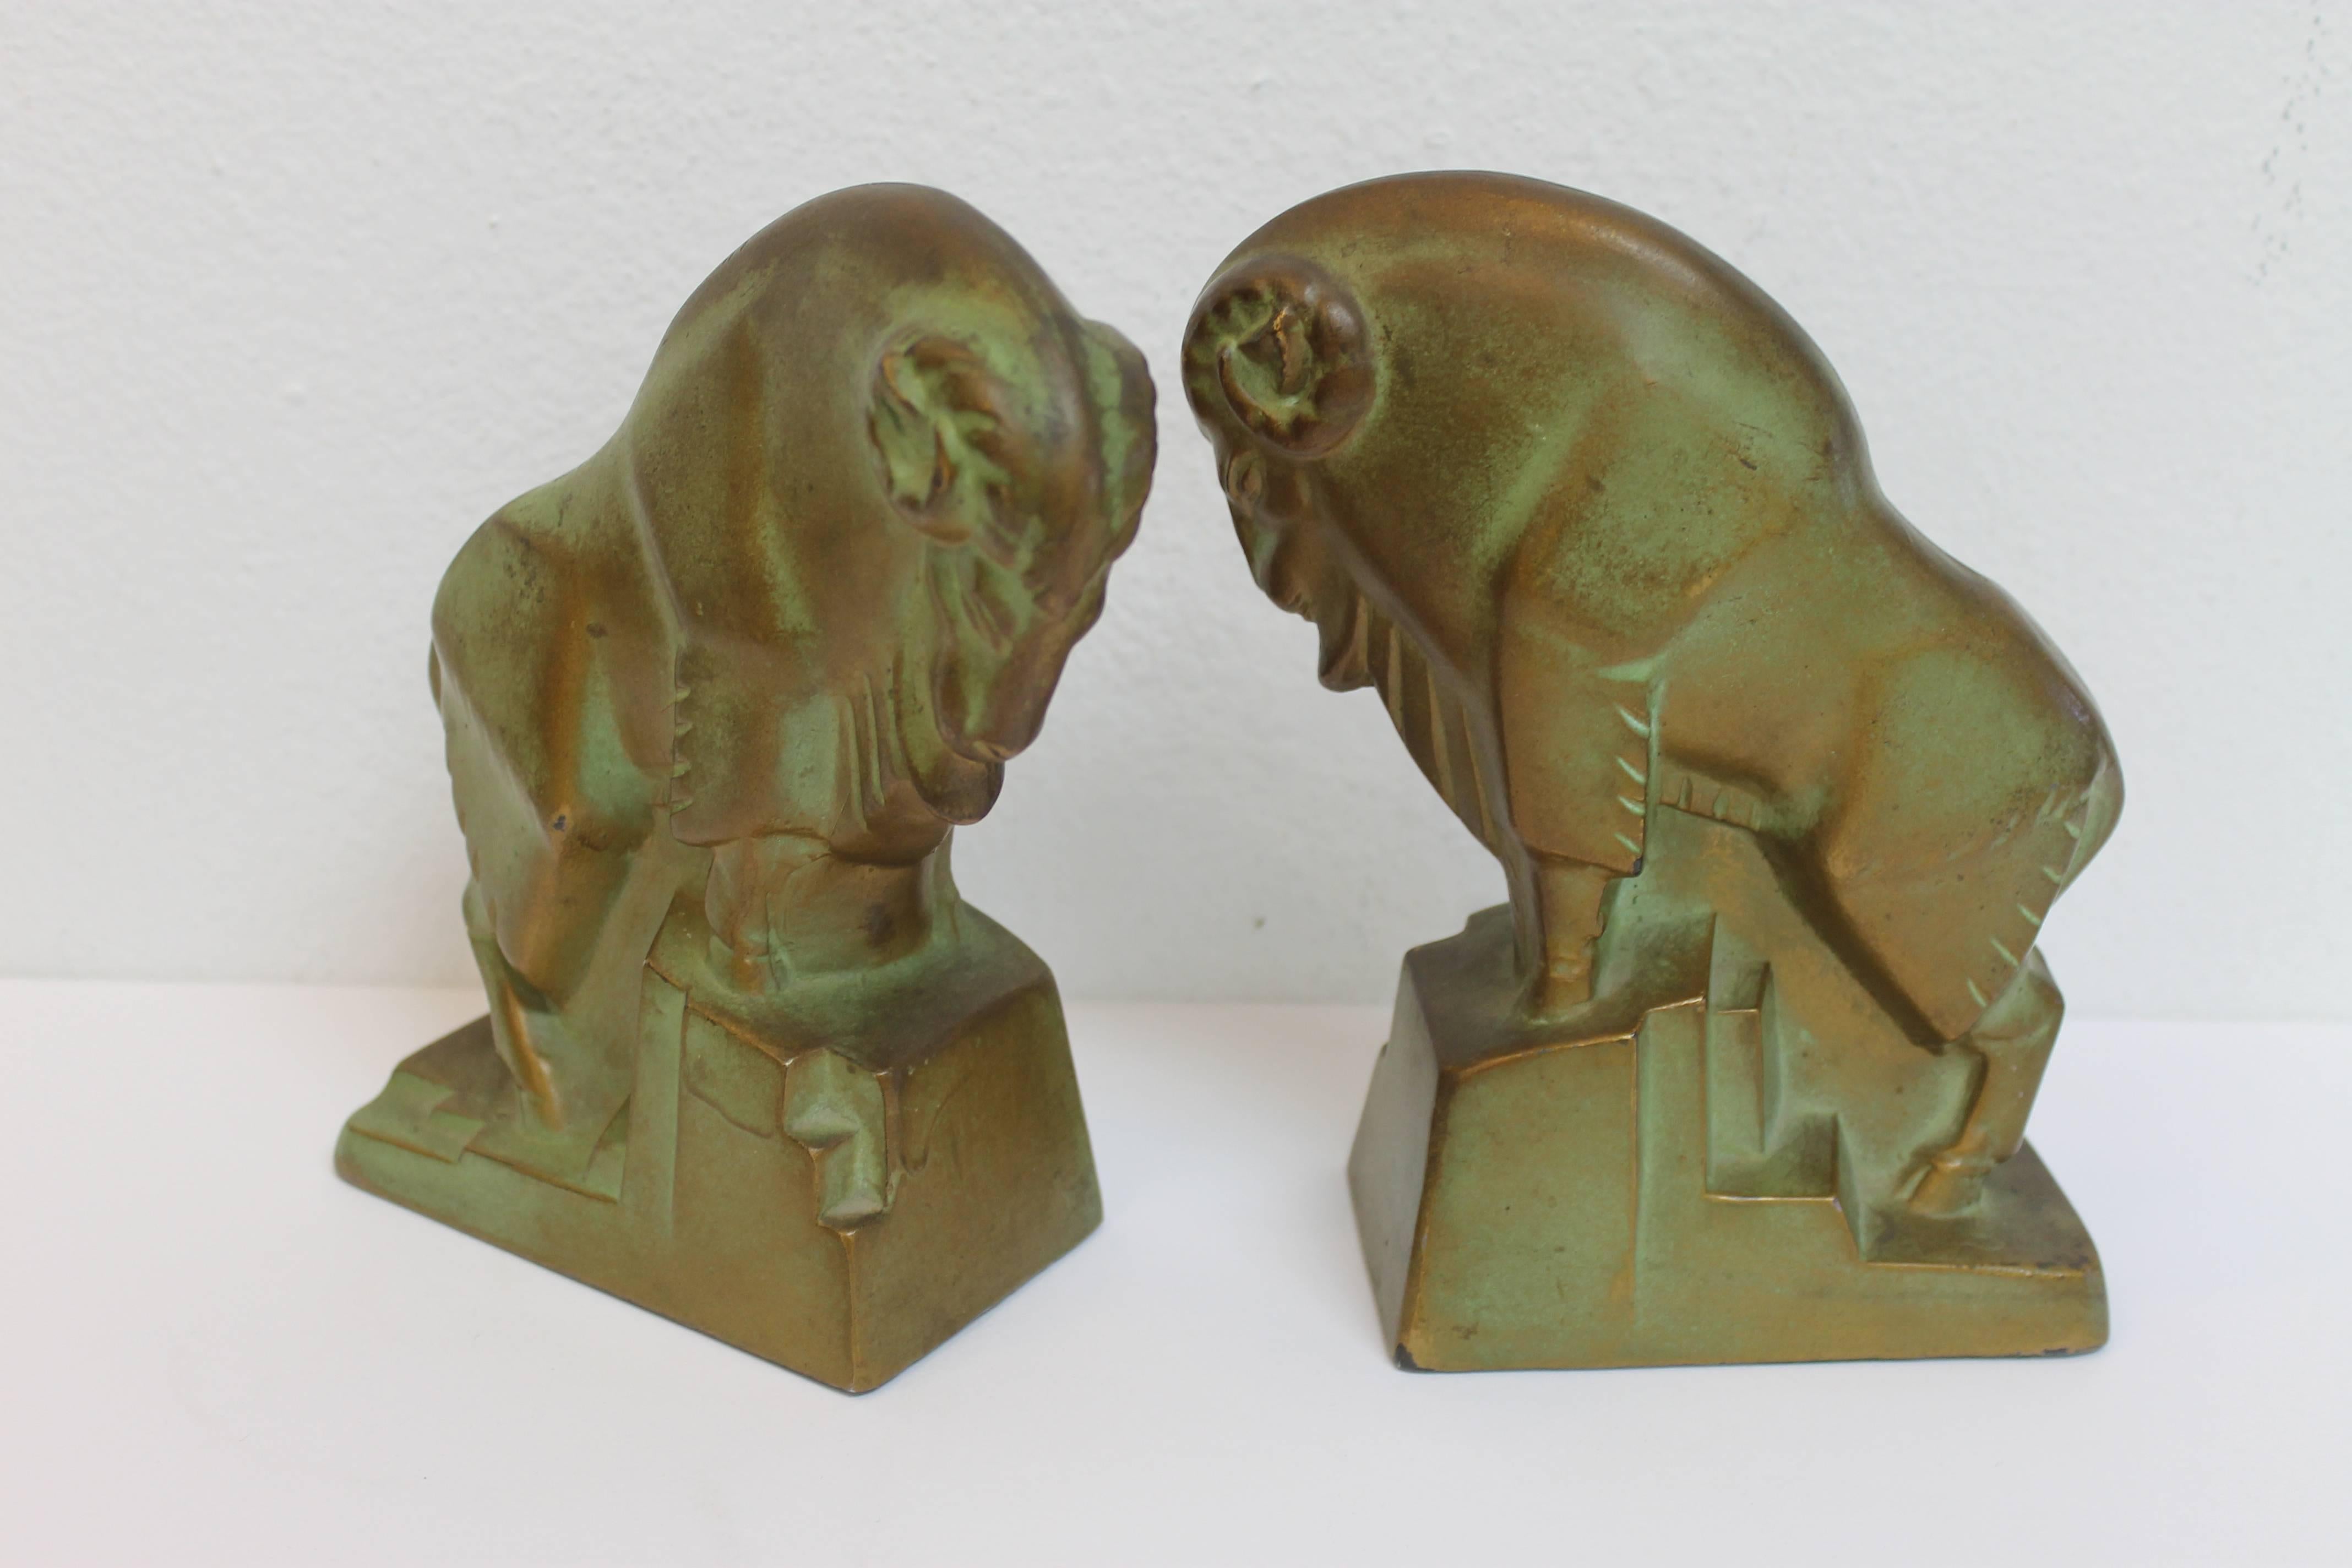 Pair of signed Ram bookends by McClelland Barclay, circa 1930's. These have an incredible bronze, green patina. They measure 6” wide, 3” deep and 7” high.